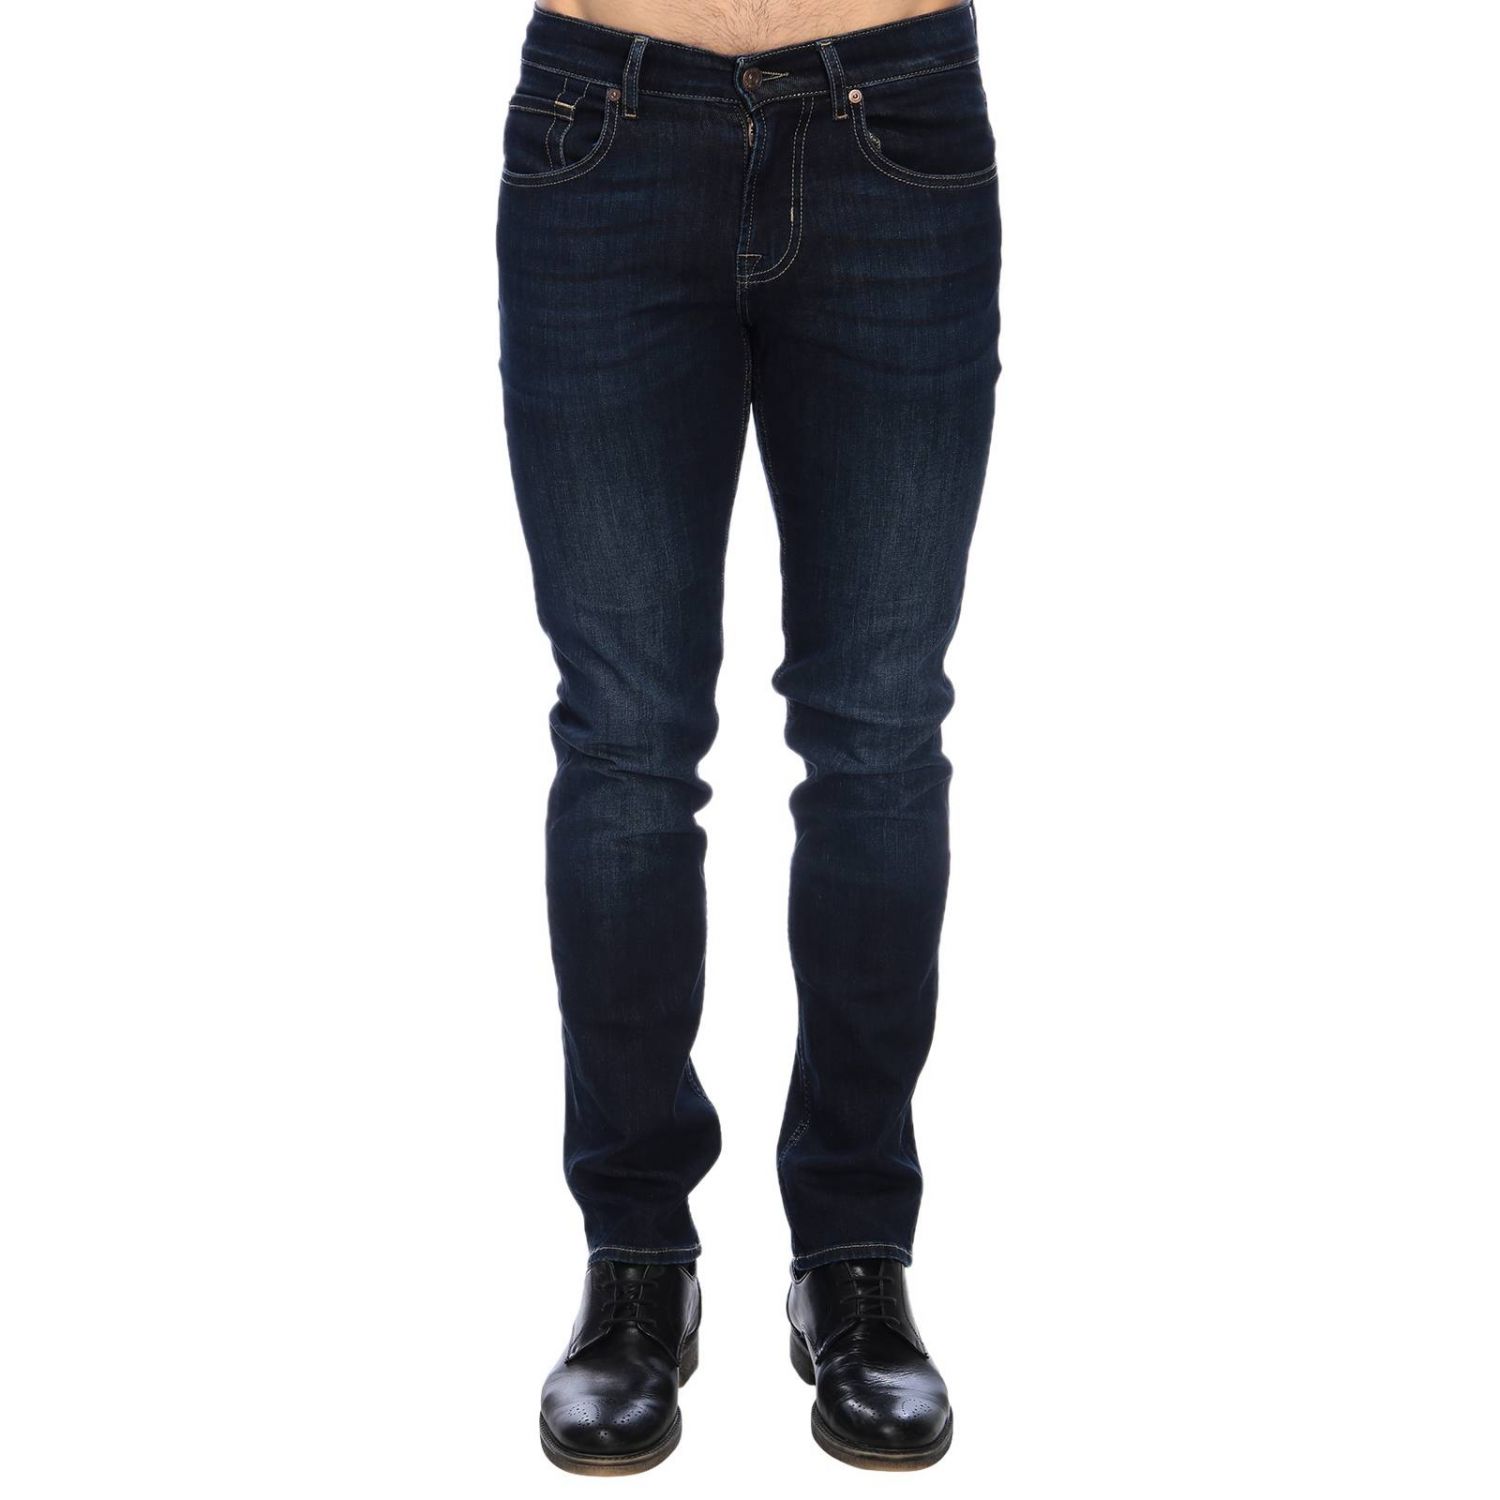 7 For All Mankind Outlet: trousers for men - Blue | 7 For All Mankind ...